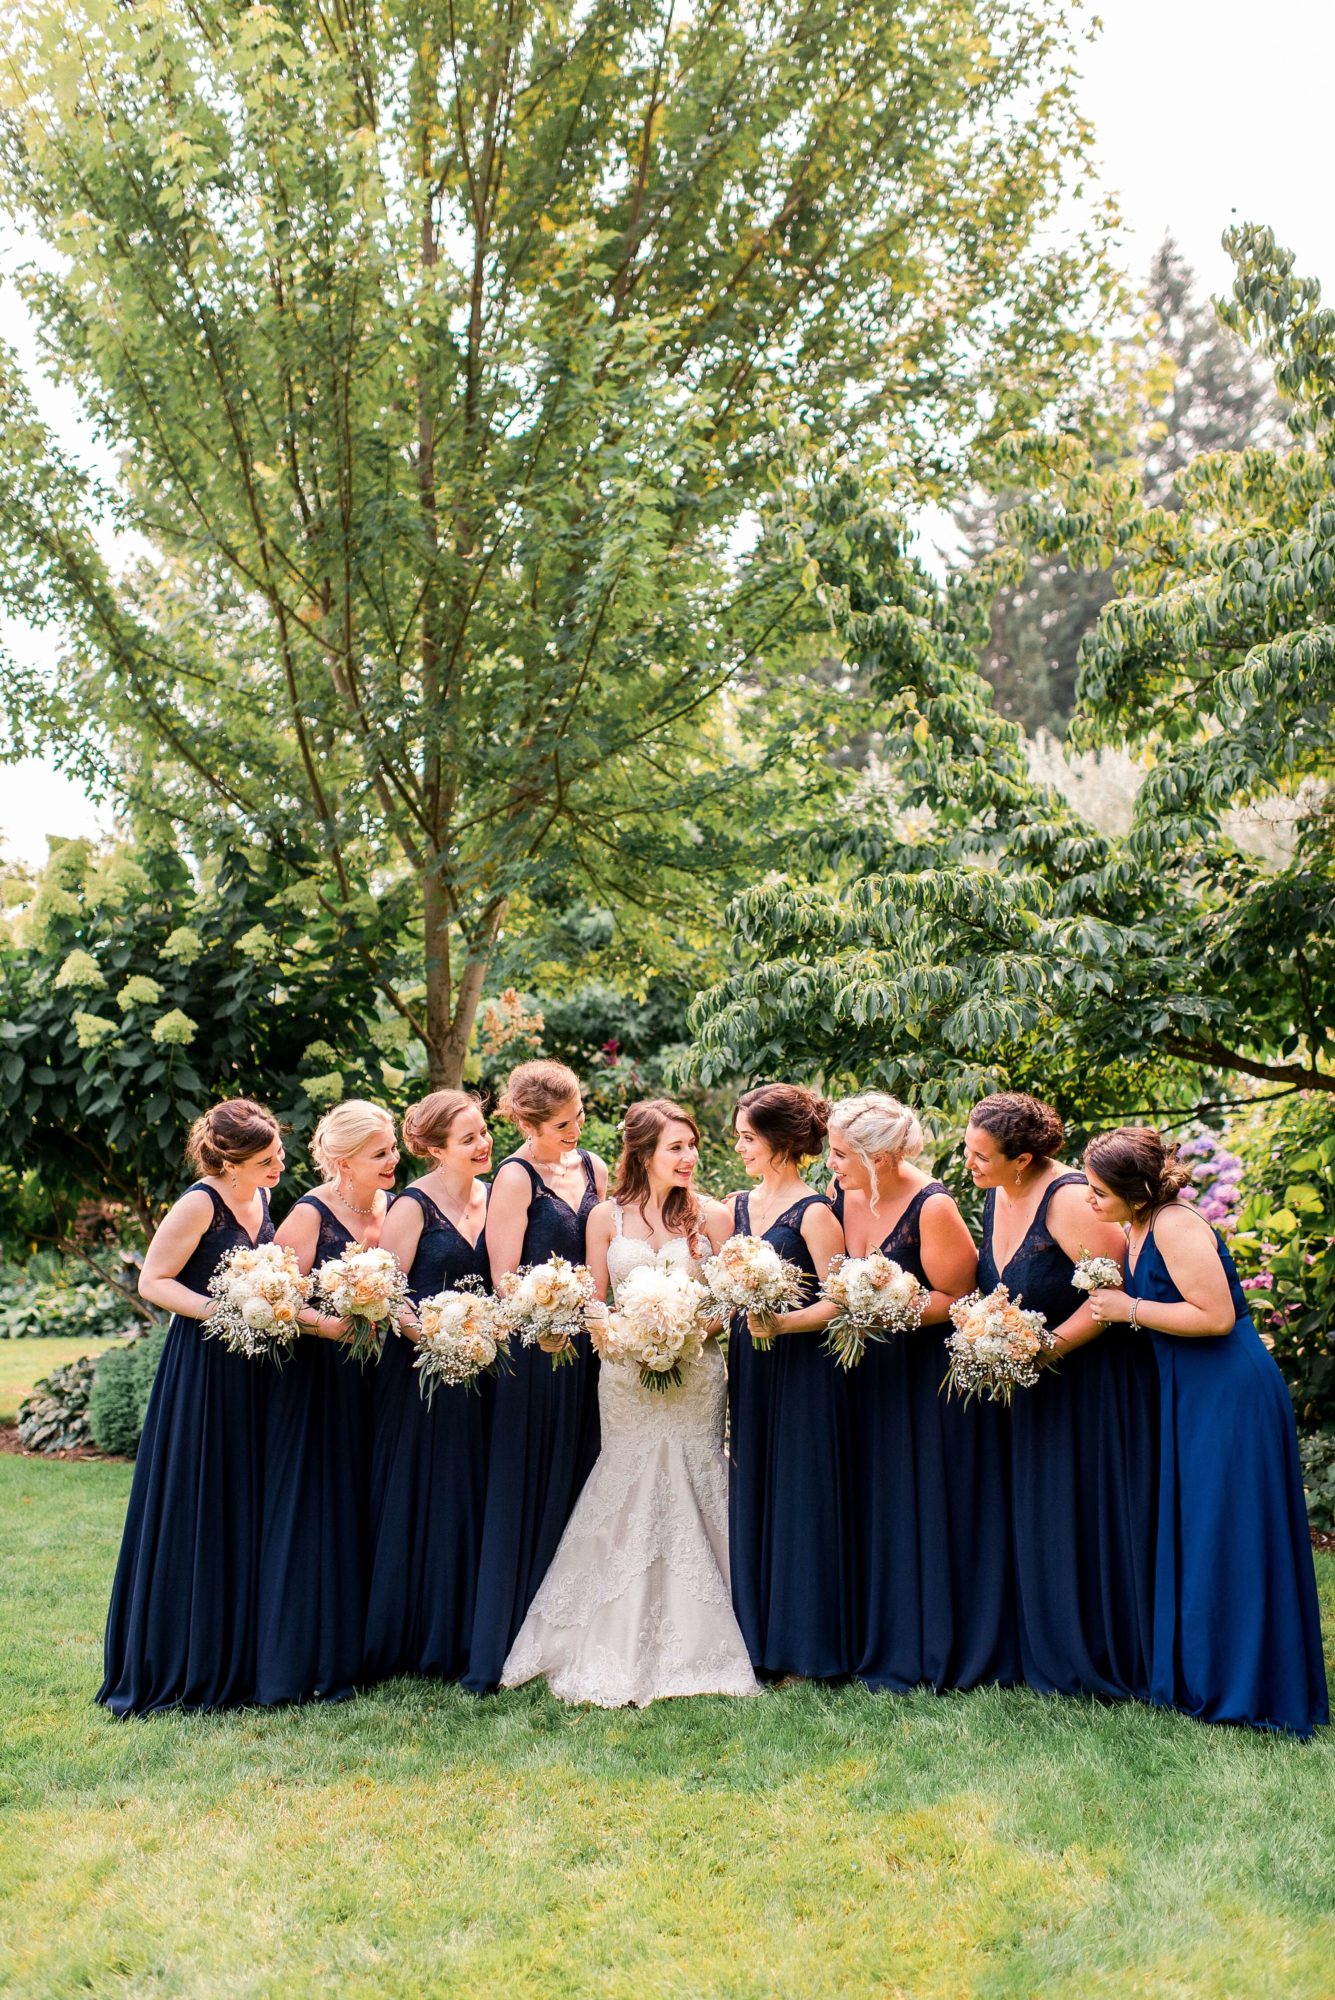 Fireseed catering wedding bridal party holding flower bouquets while in the garden